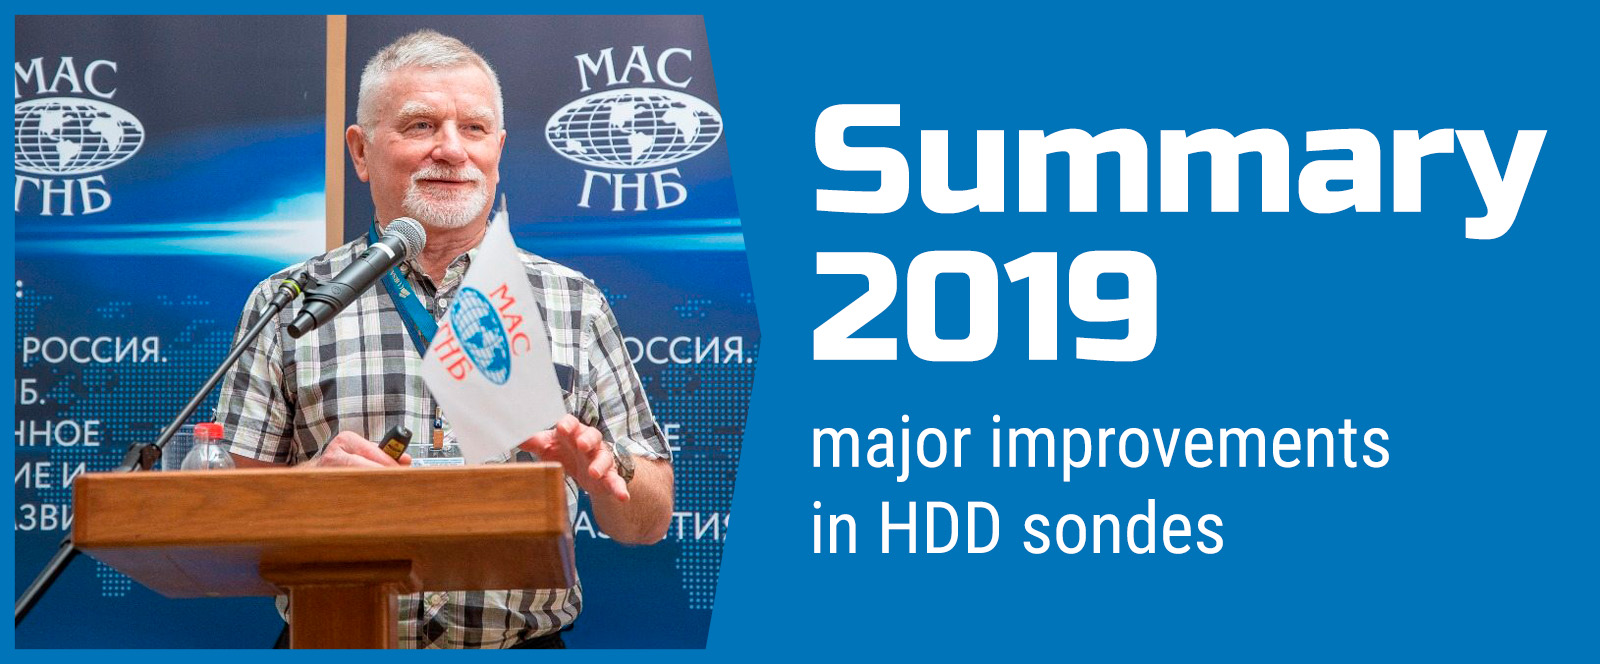 Summary by Alexander Nagovitsyn: major improvements in HDD sondes in 2019 and development prospects in 2020